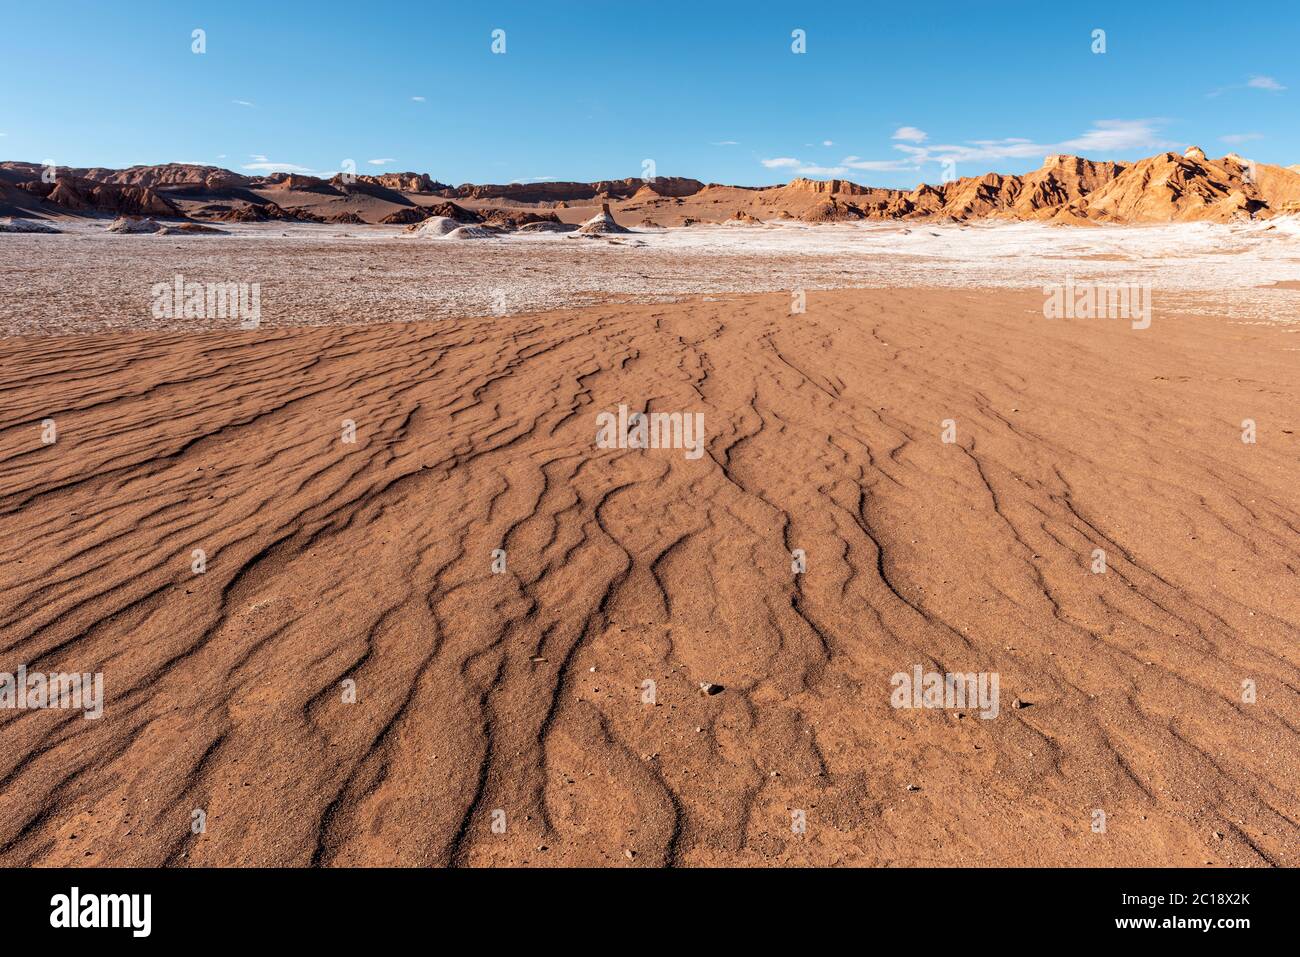 A dry riverbed landscape in the arid Moon Valley of the driest desert on earth, Atacama Desert, Chile. Stock Photo